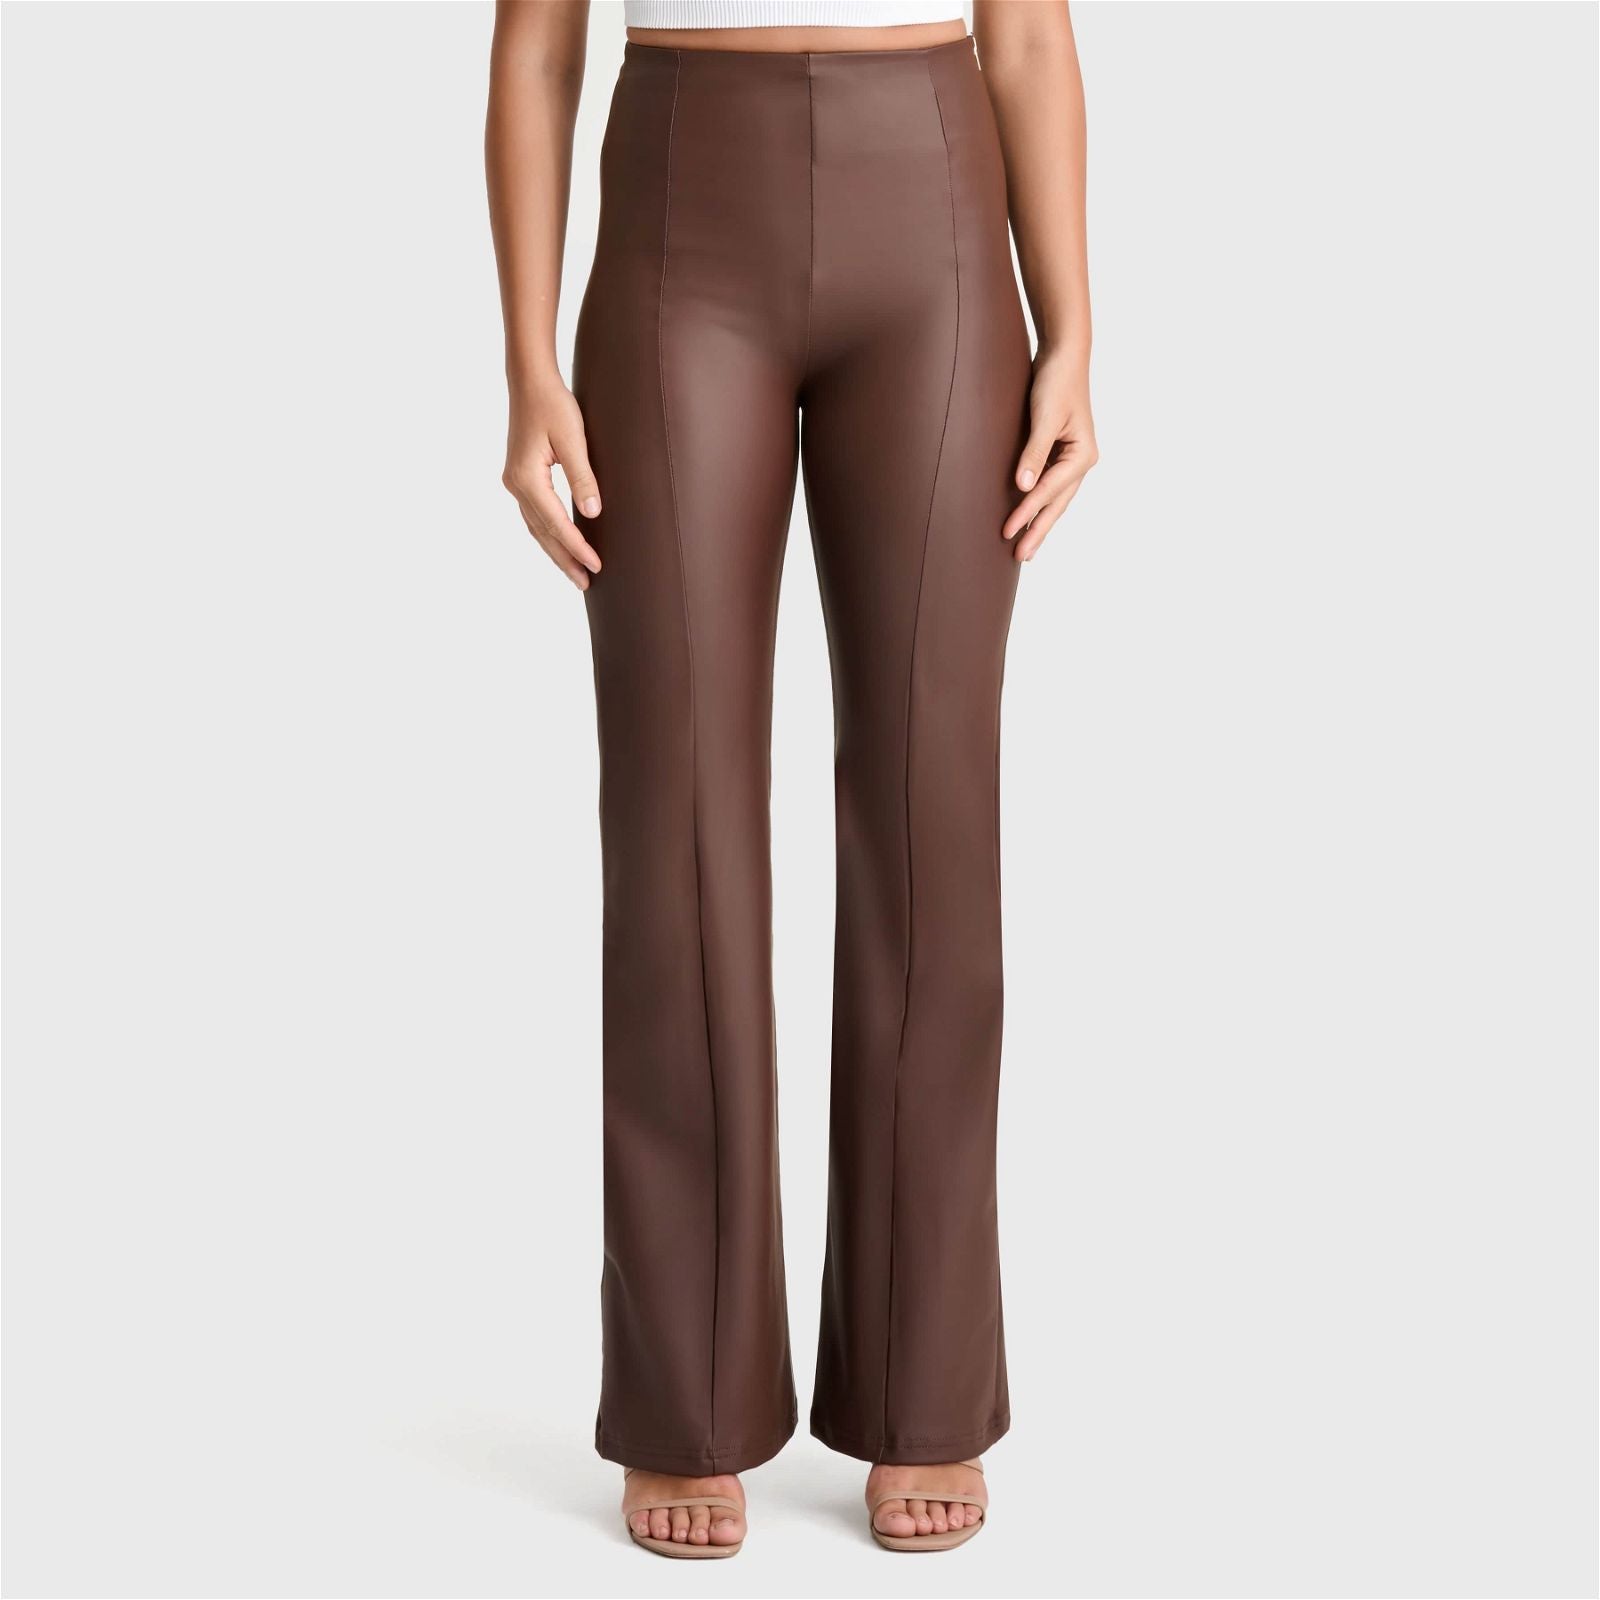 WR.UP® Faux Leather - Super High Waisted - Super Flare - Chocolate 3